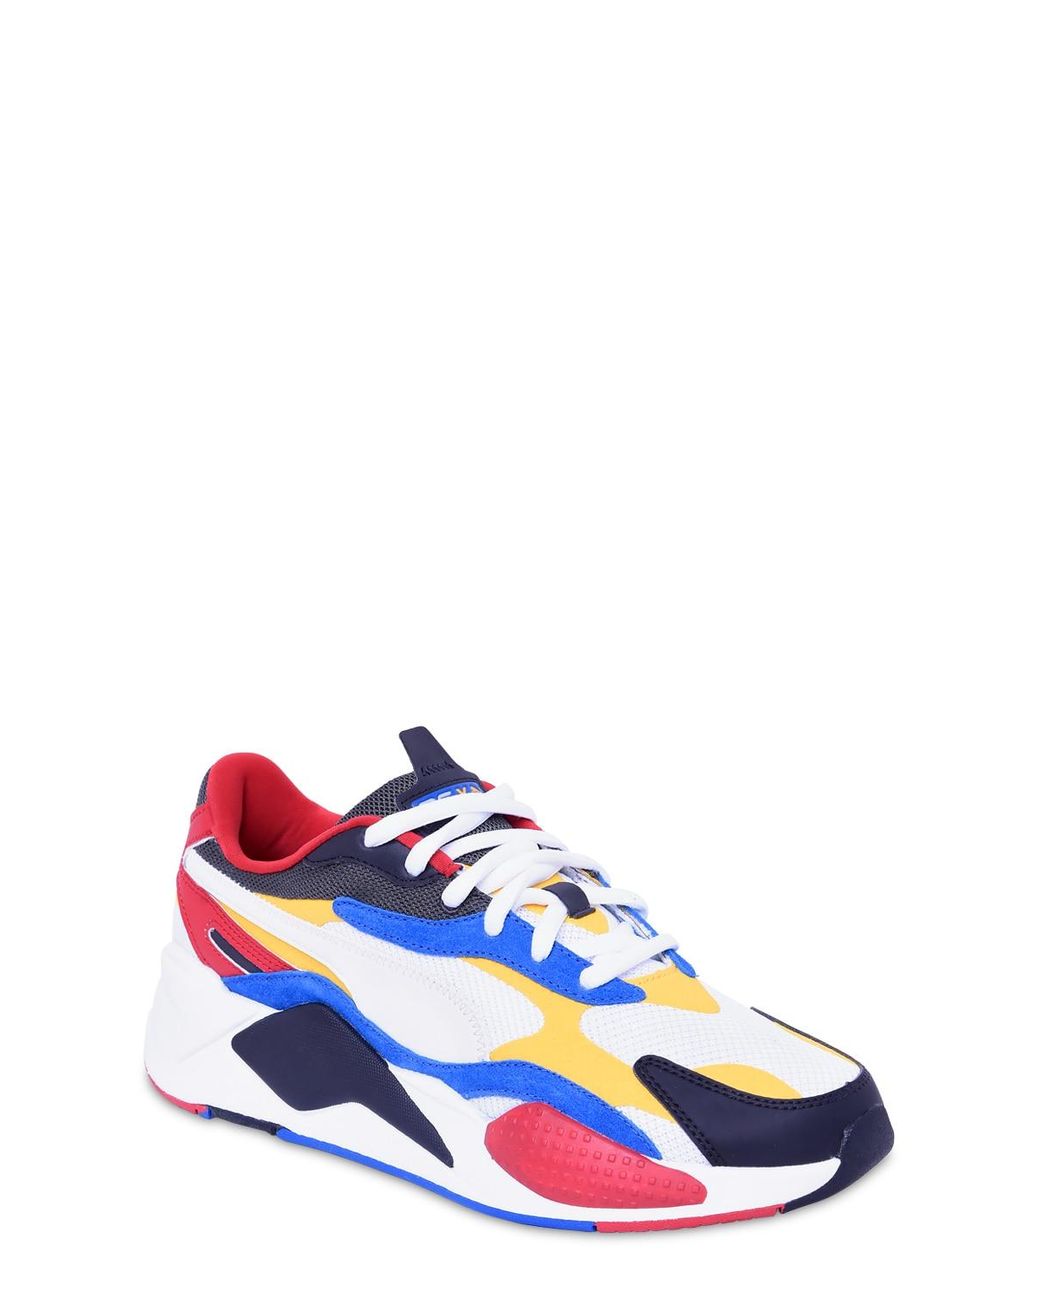 Puma Select Synthetic Rs-x3 Puzzle Sneakers in White/Yellow (Blue) | Lyst